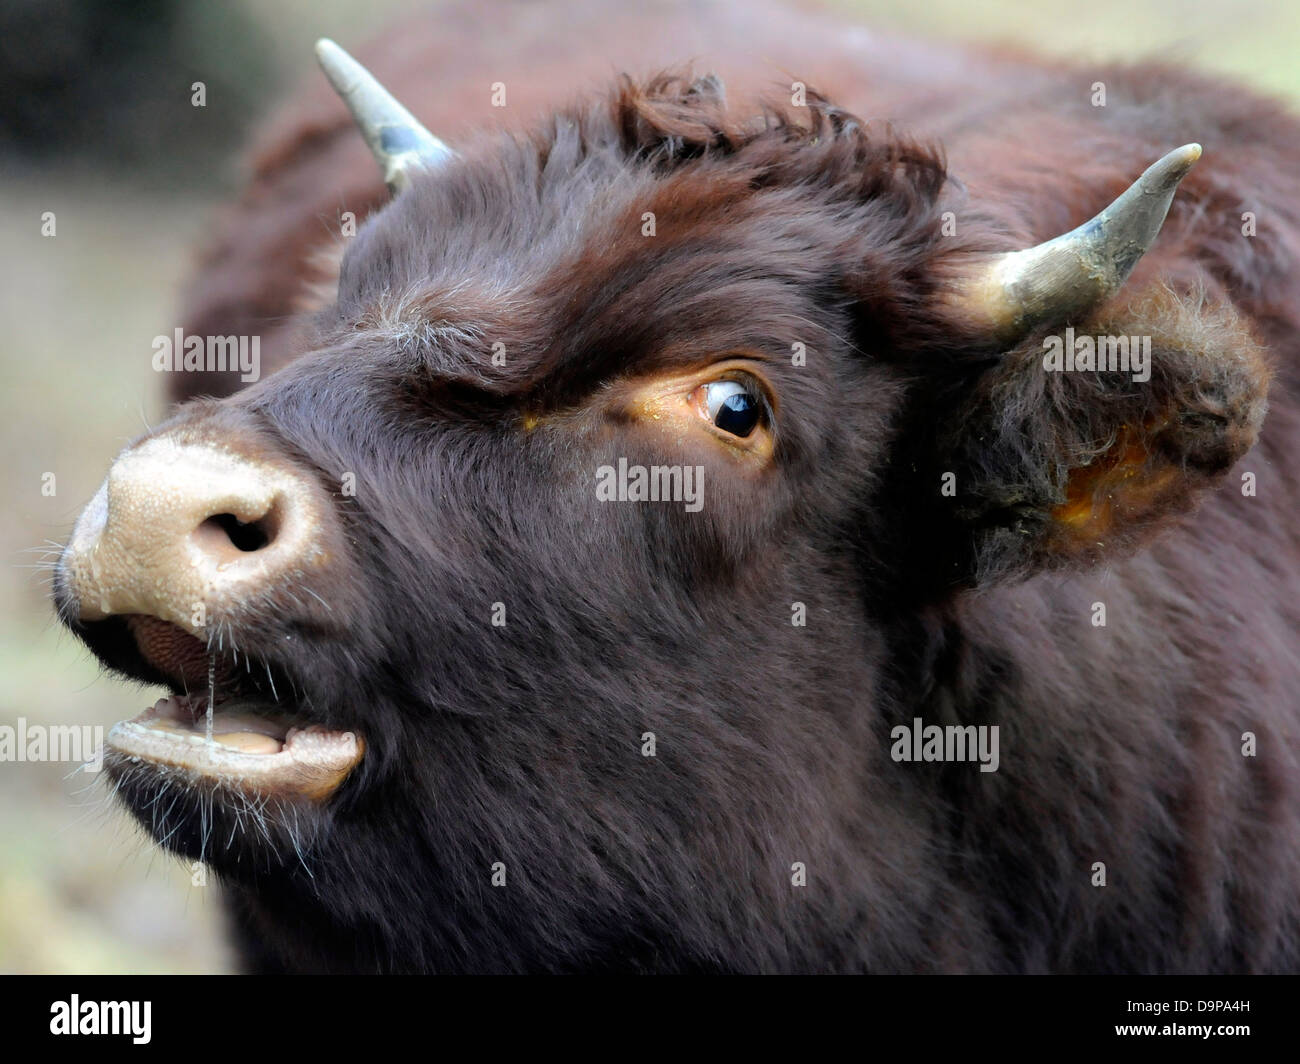 A young bull that is alarmed and scared. Stock Photo